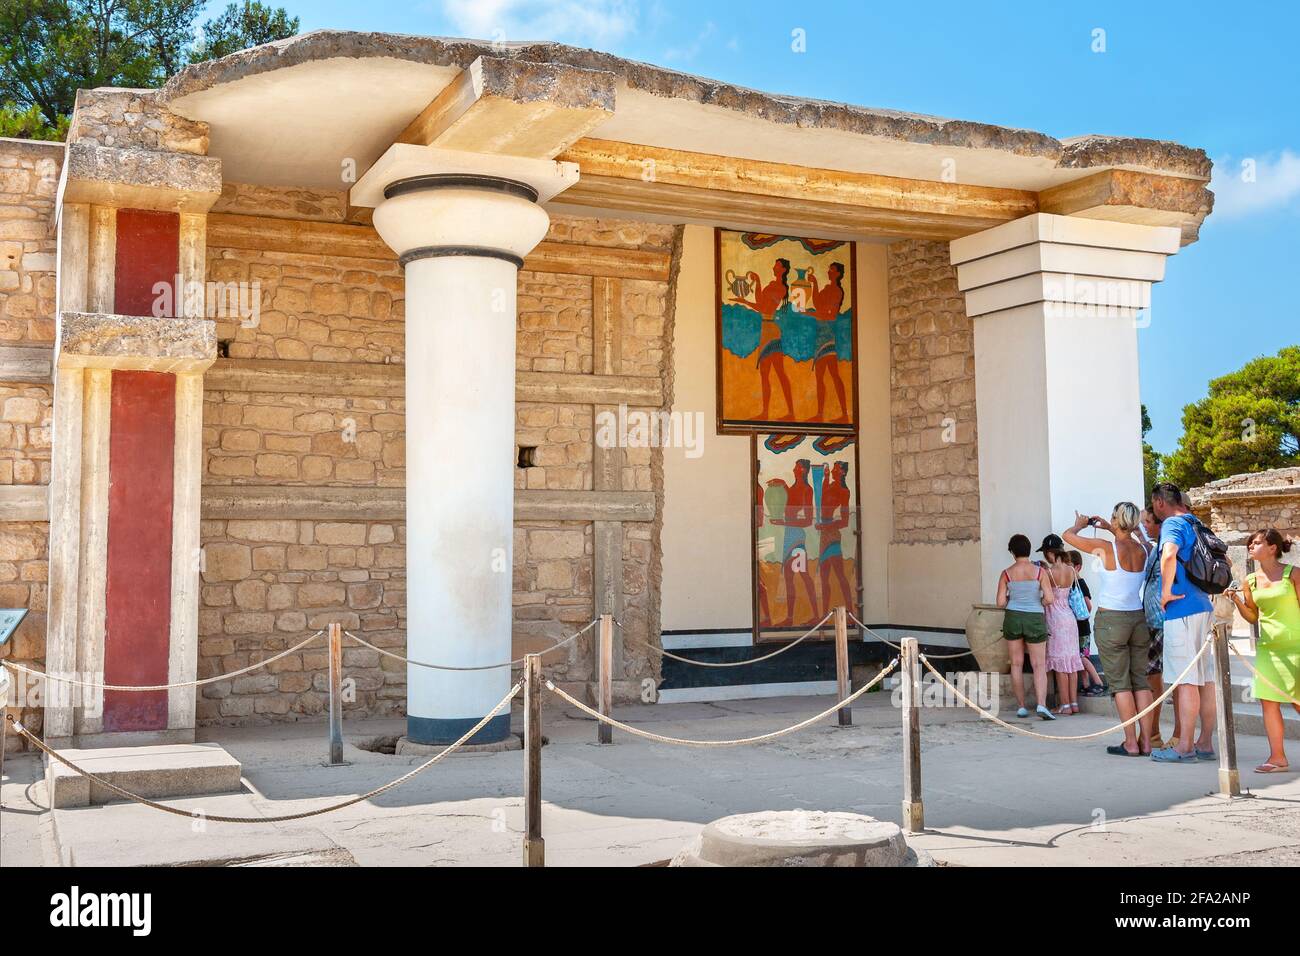 Tourist on a guided tour in Knossos palace near south Propylaeum with procession fresco. Crete, Greece Stock Photo